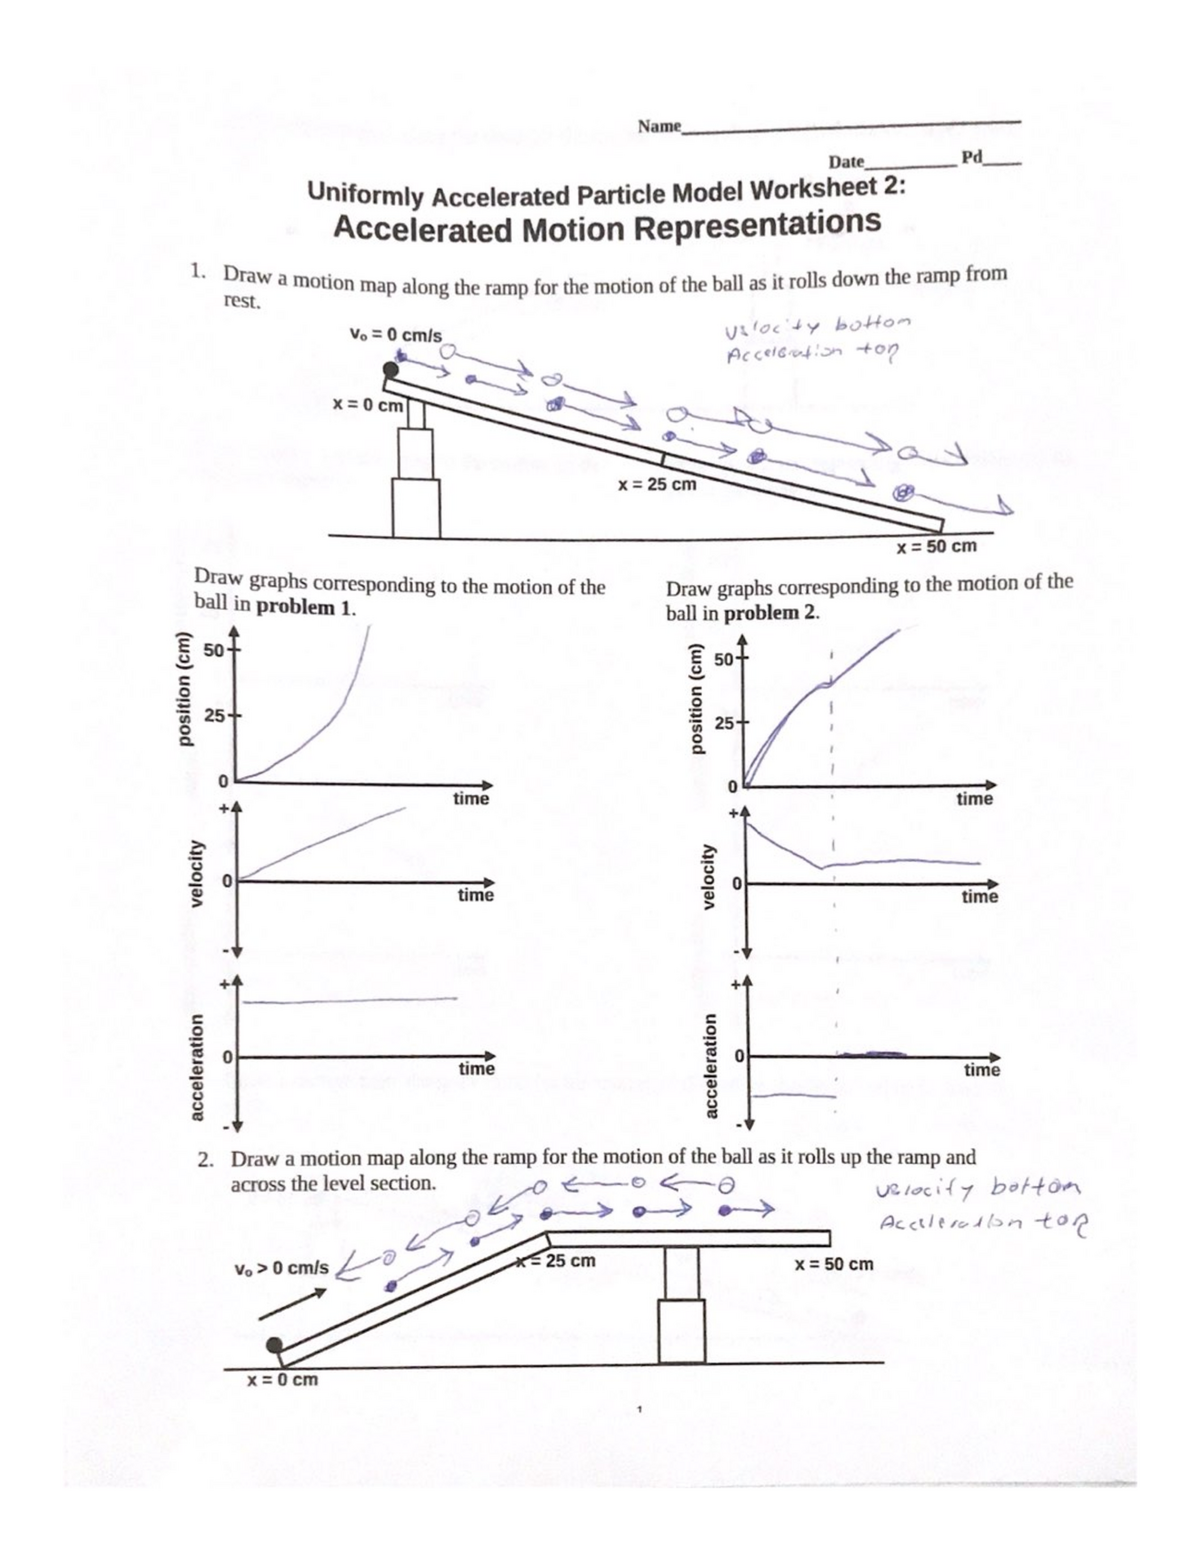 Uniformly Accelerated Particle Model Worksheet 2 PHY 241 Studocu